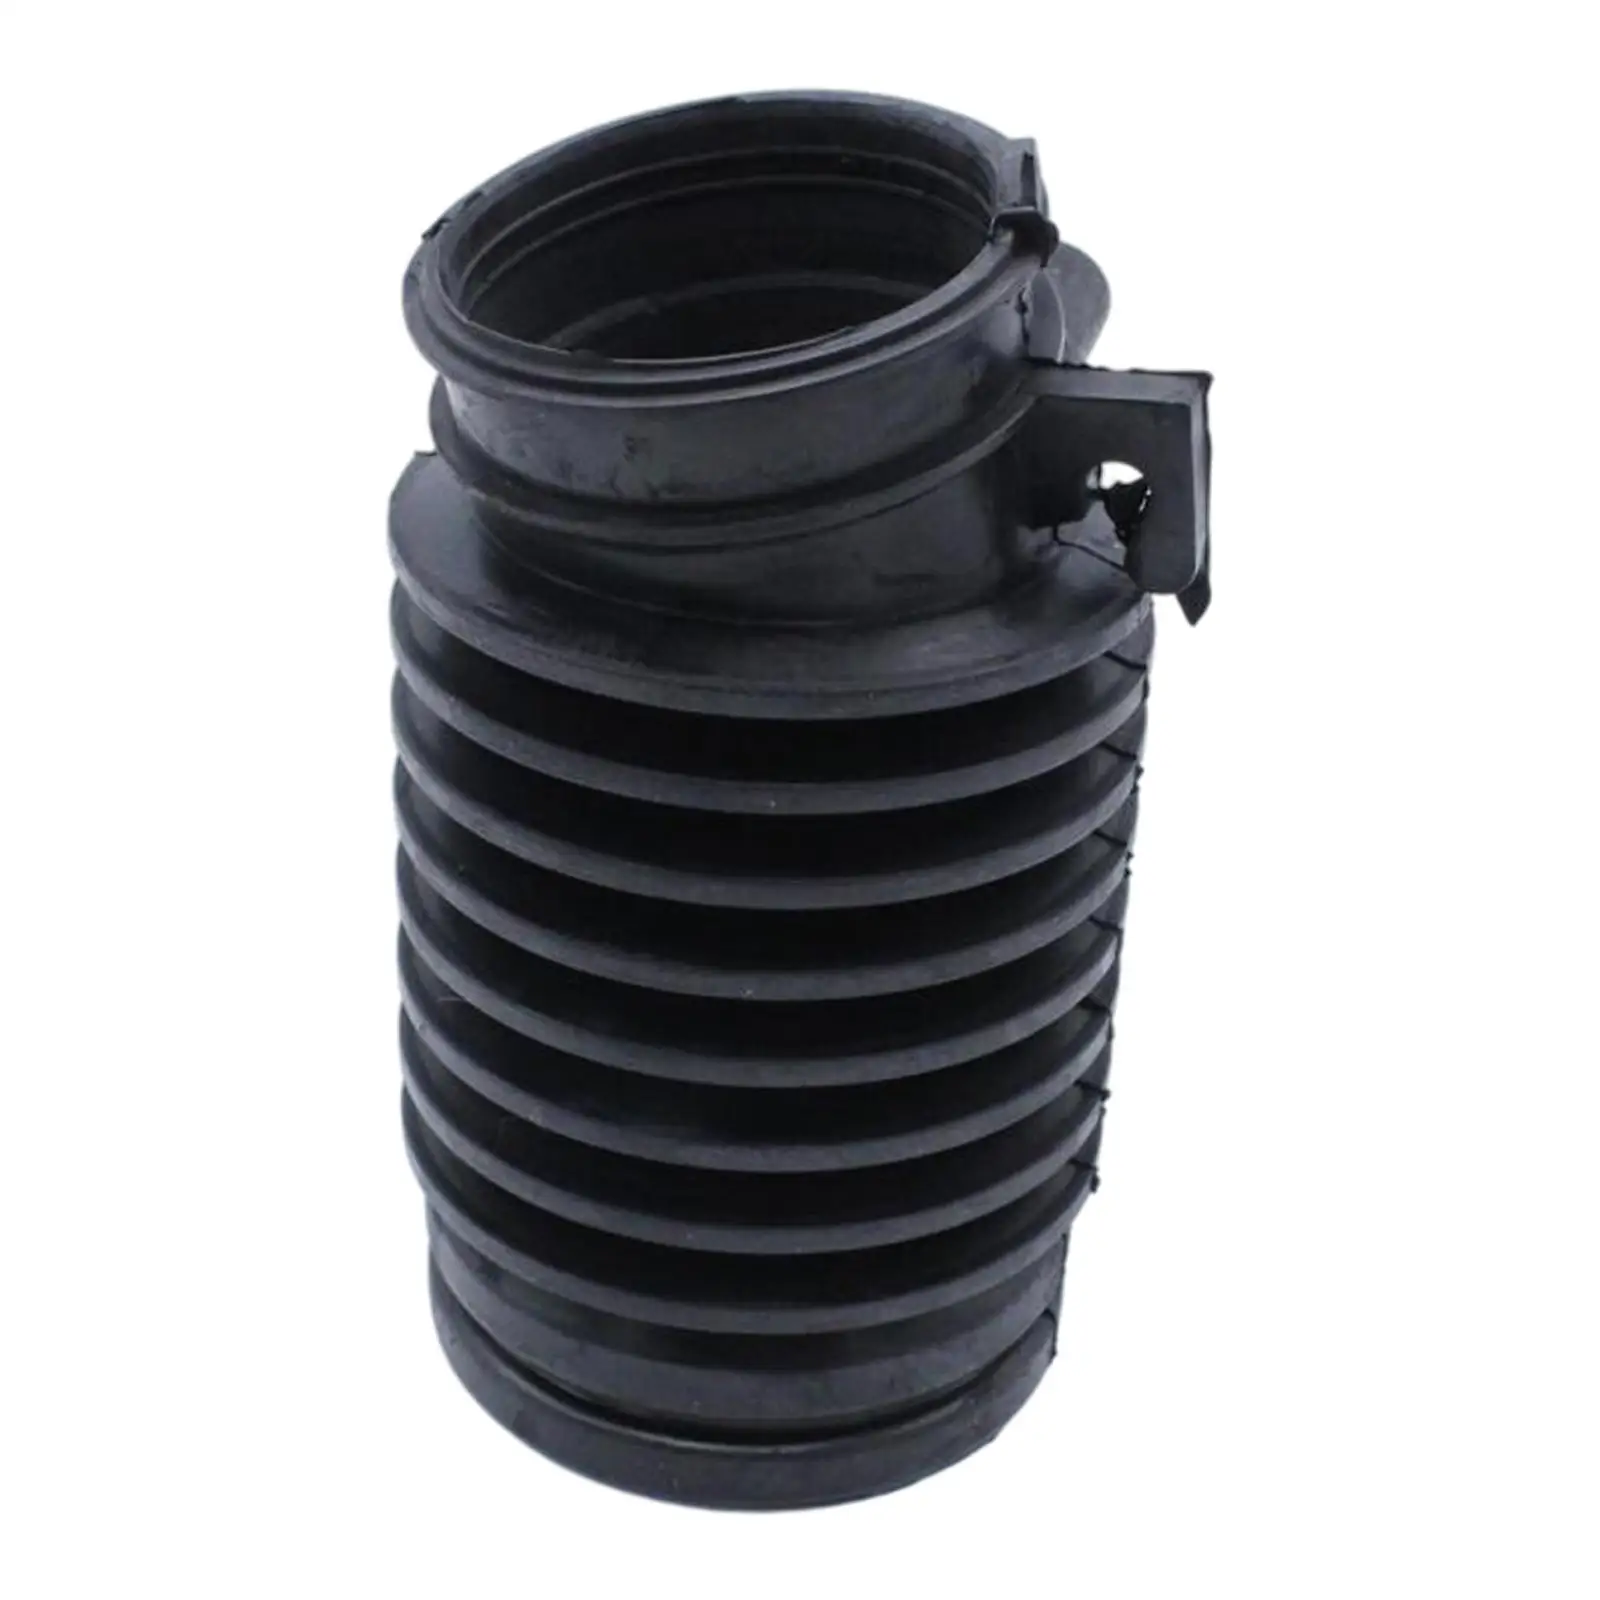 Air Intake Hose 17228Rcaa00 Replace Fit for Accord V6 3.0L 2003-2007